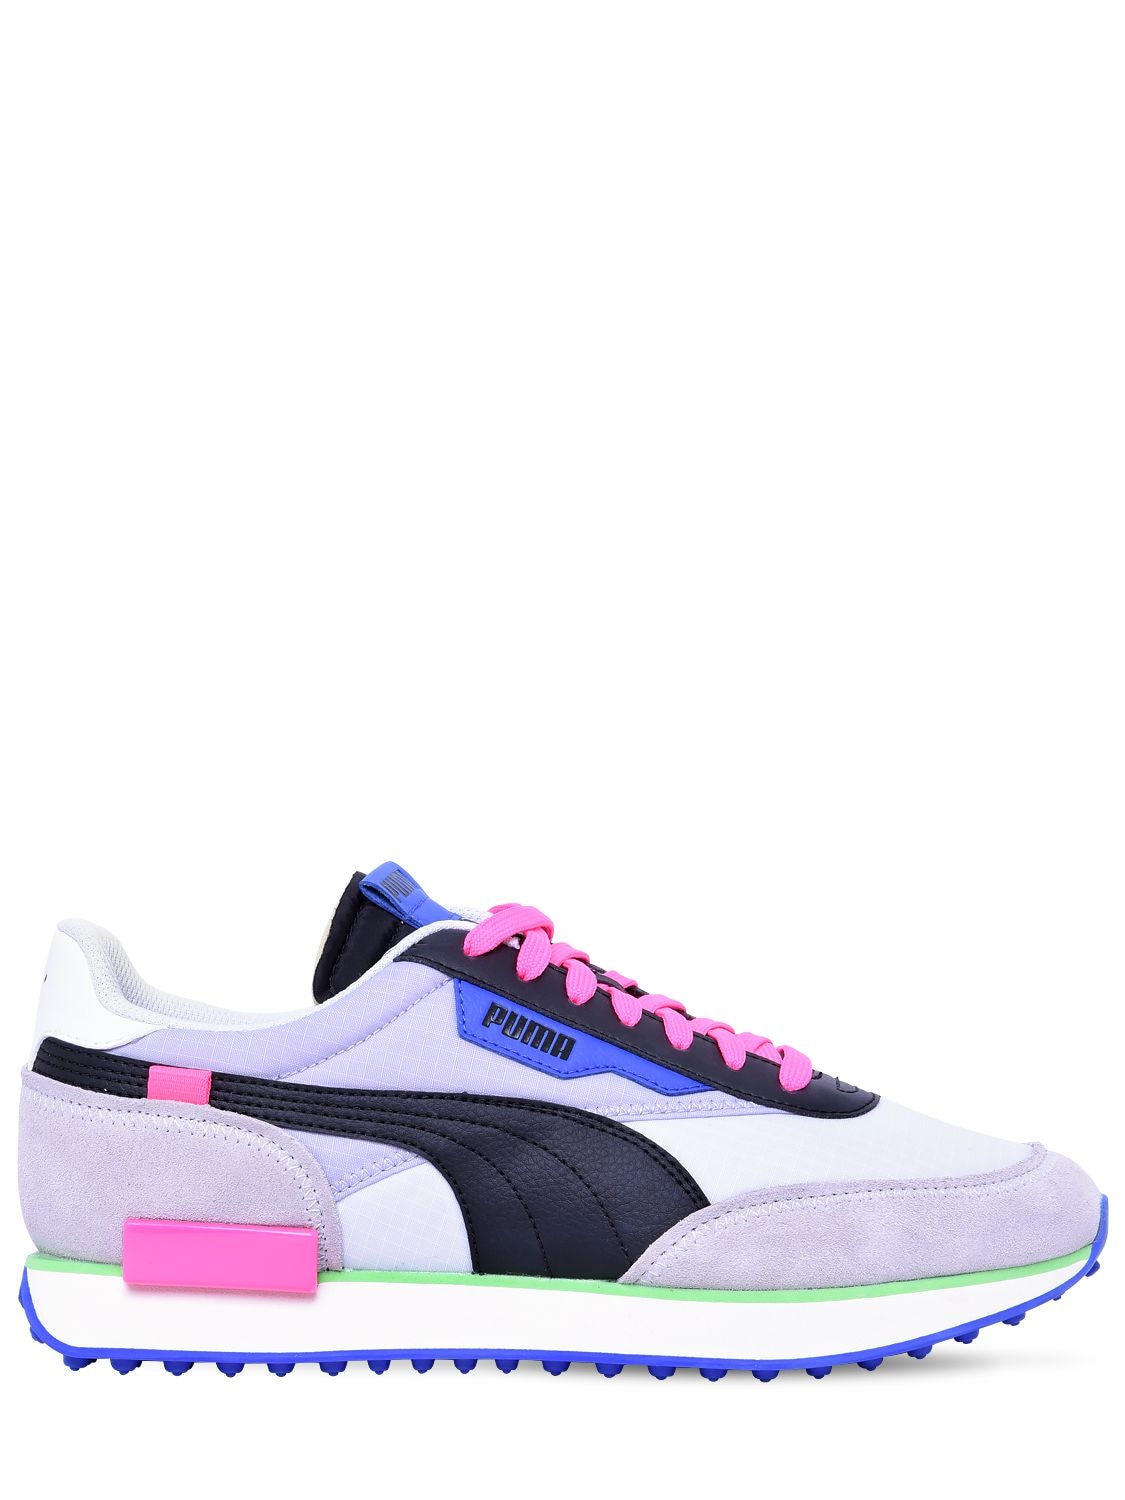 PUMA RIDER GAME ON SNEAKERS,71I0T8004-MDC1